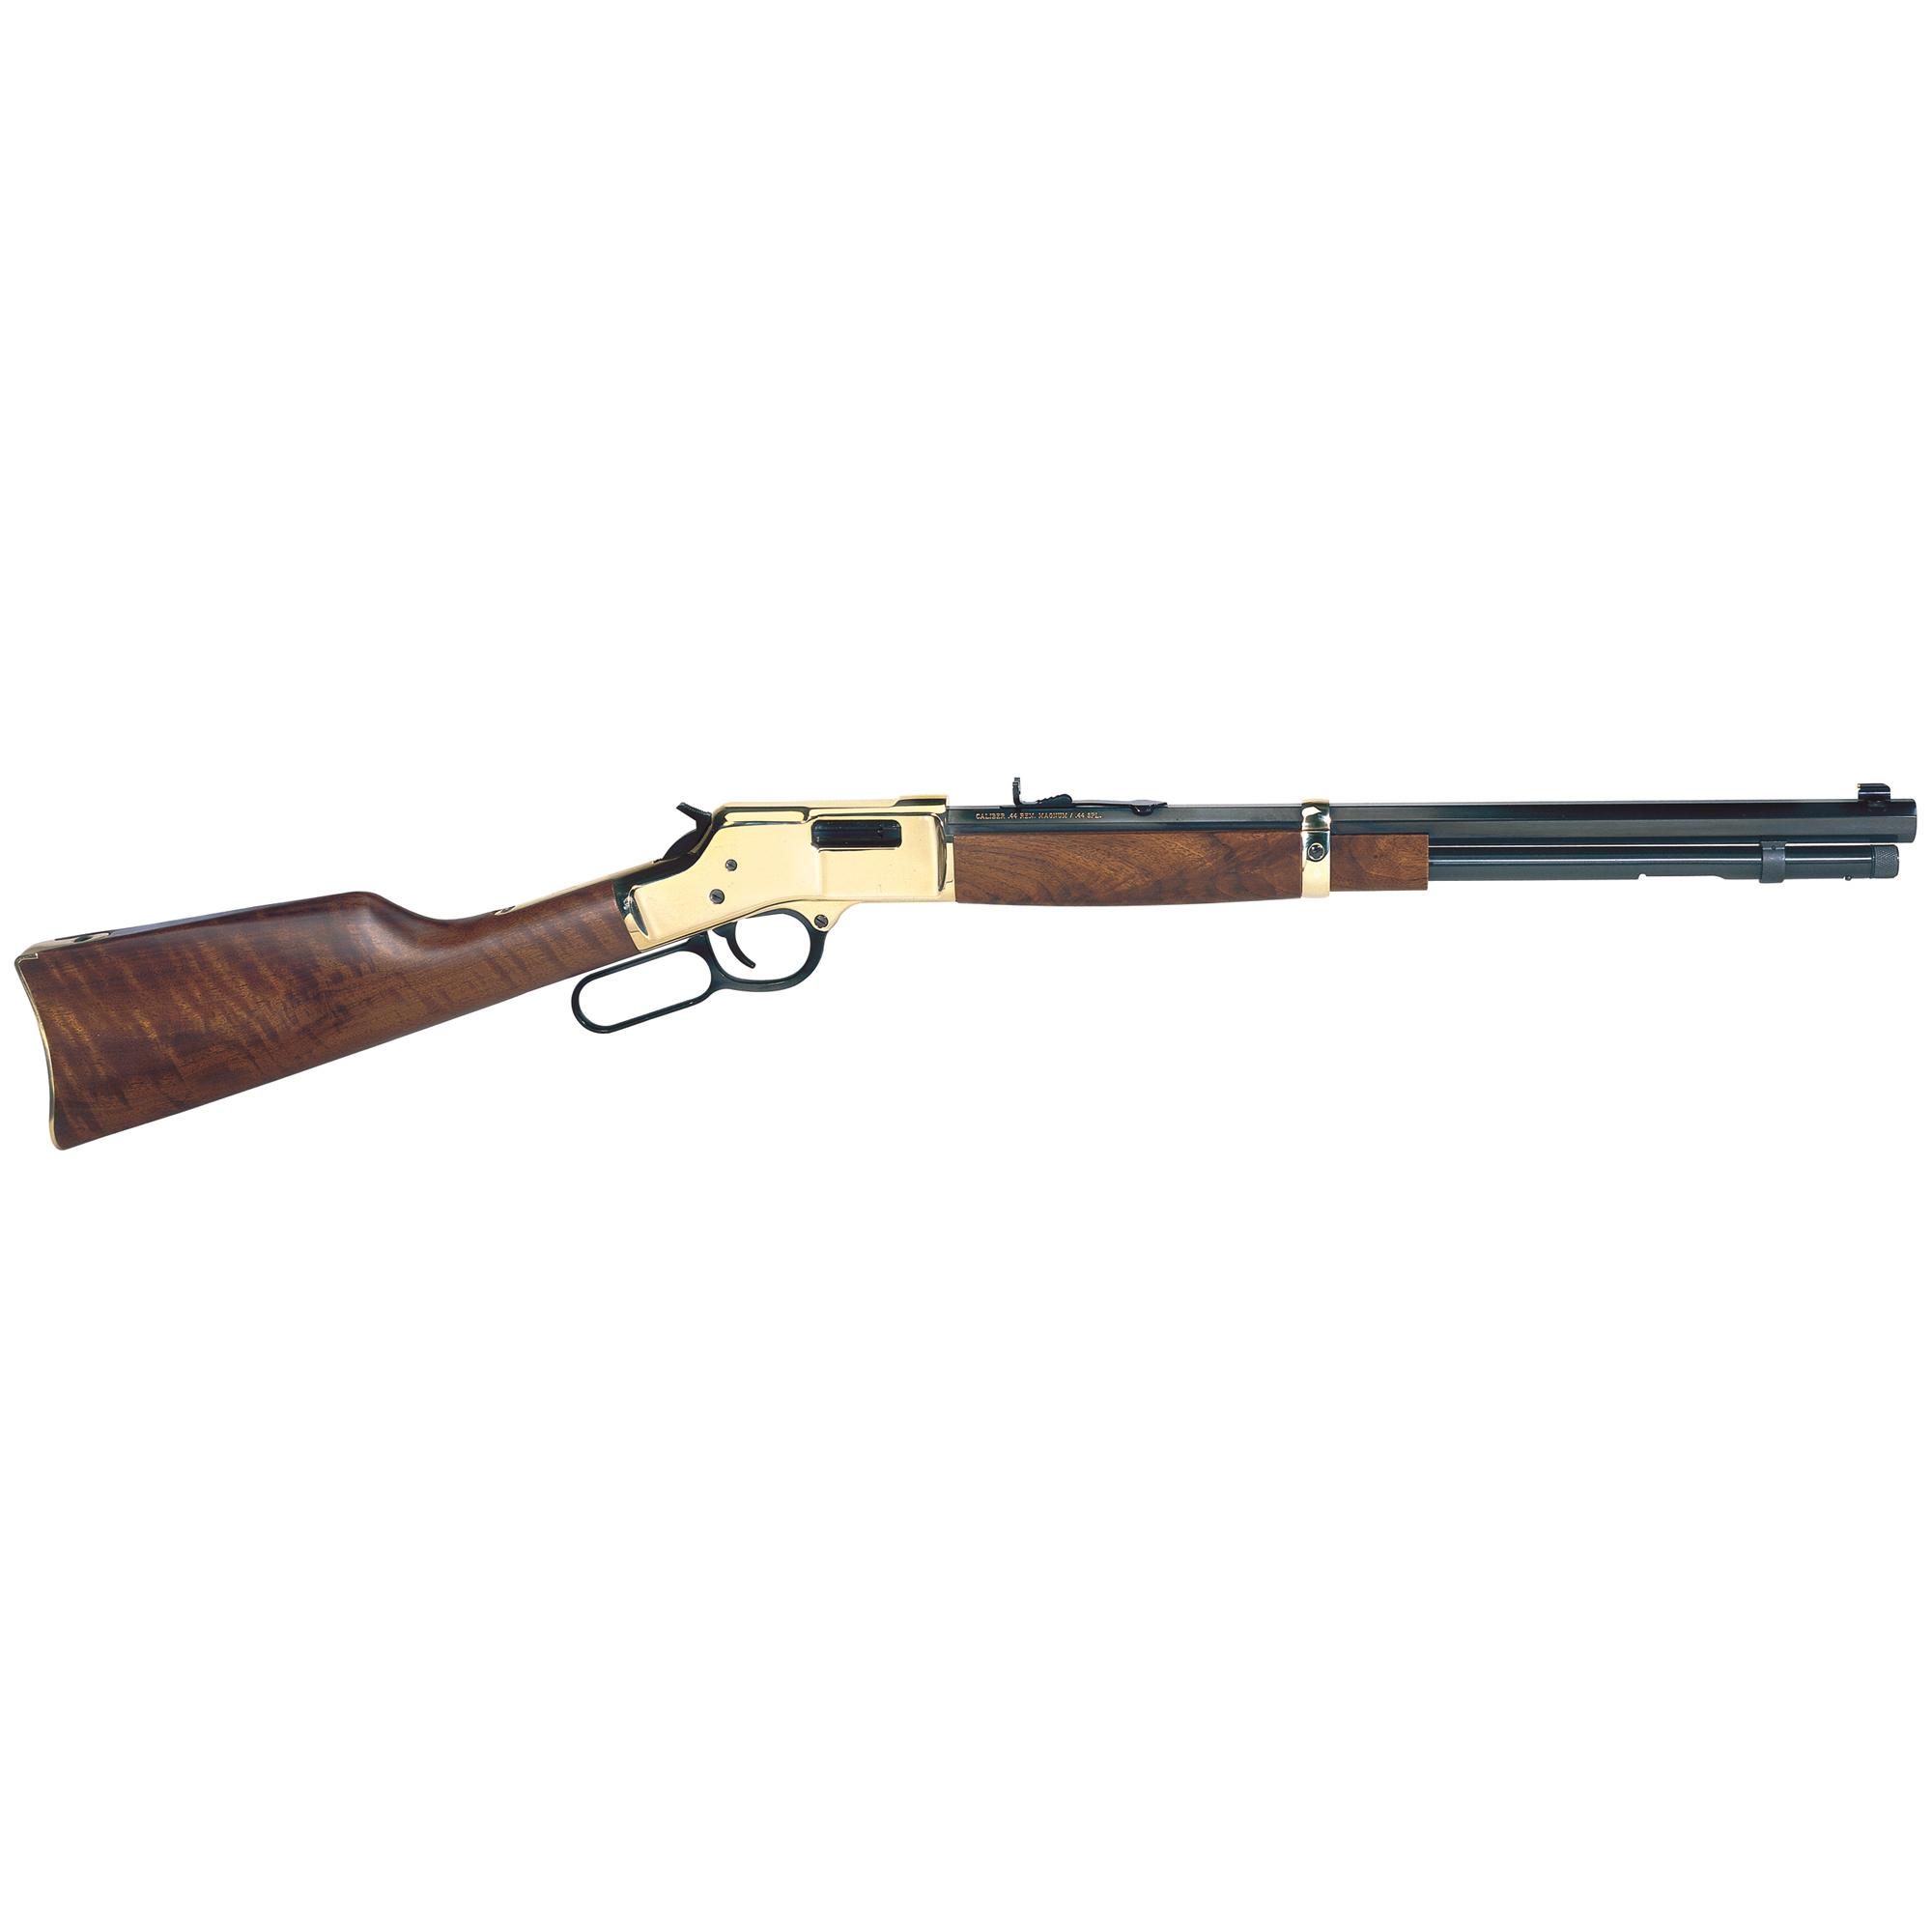 Henry Repeating Arms, Big Boy, Lever Action, 357 Magnum, 20" Barrel, New In Box, H006M